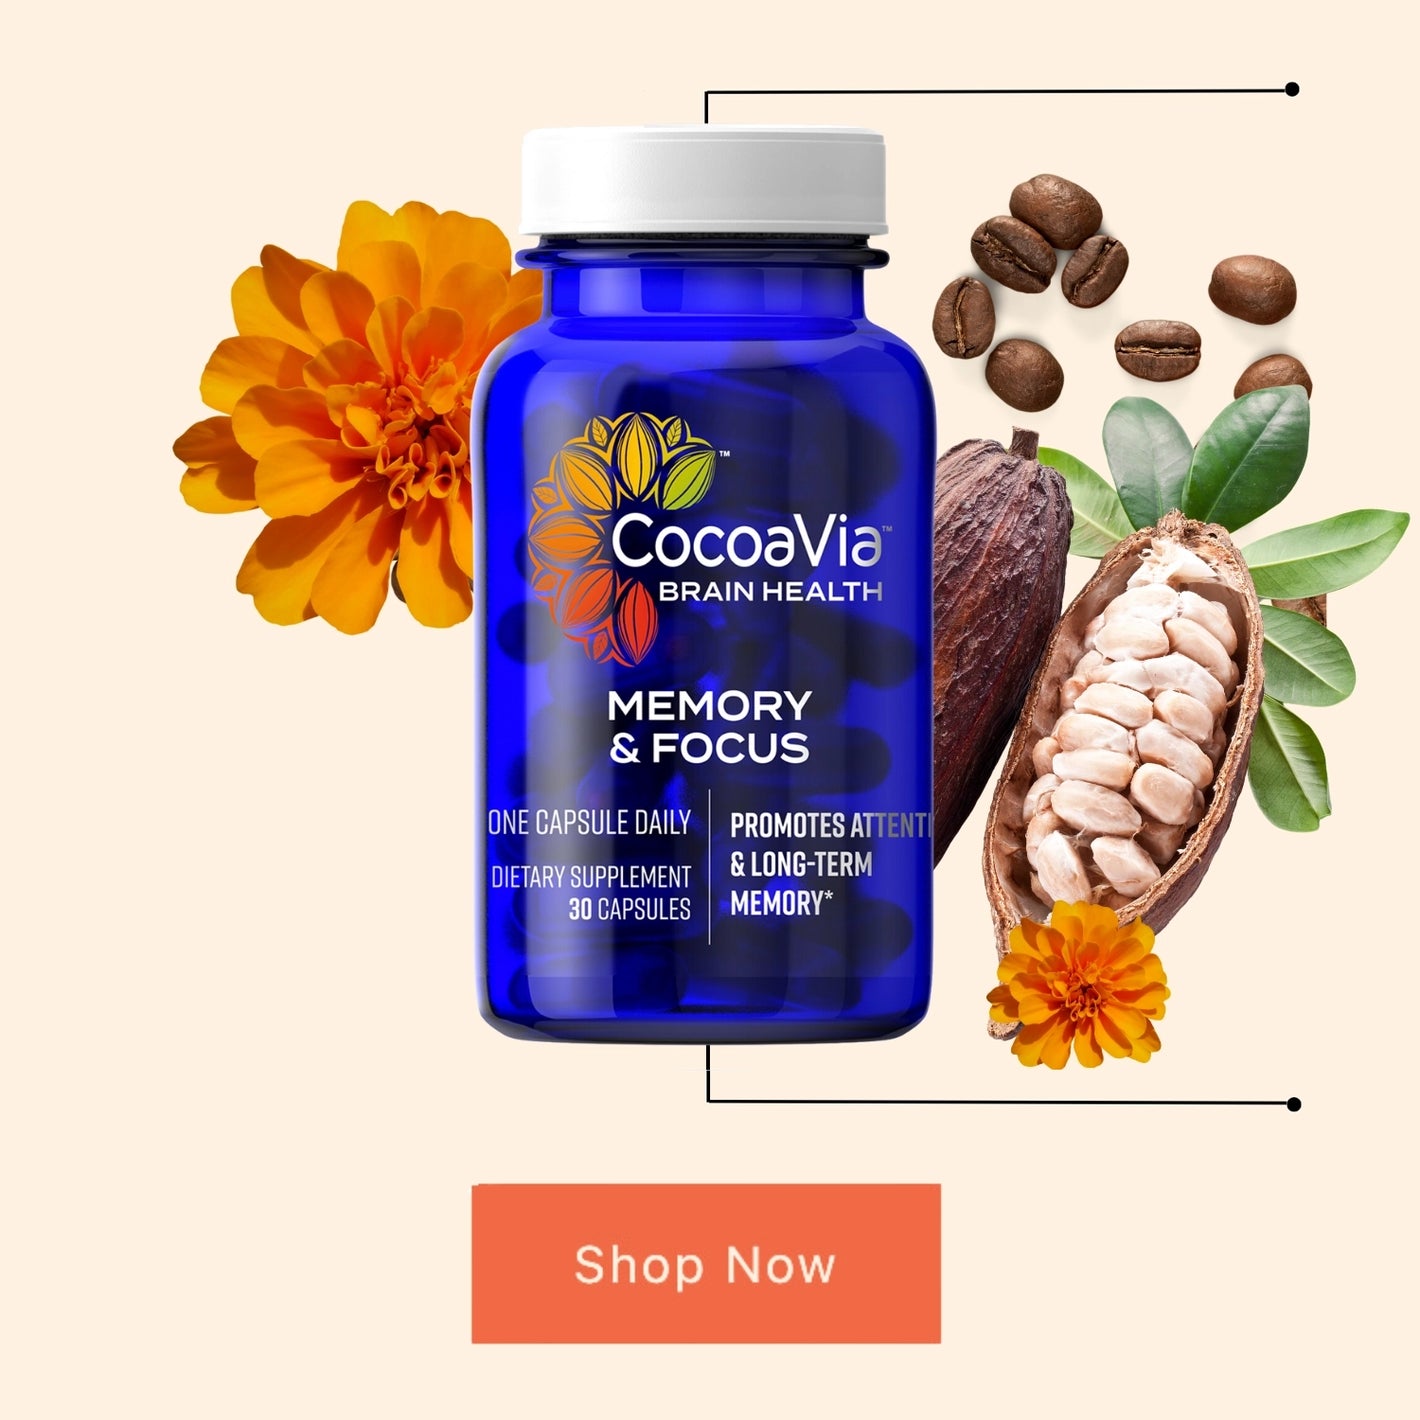 CocoaVia Memory & Focus Bottle With Cocoa Pod, Marigold Flower and coffee beans. 